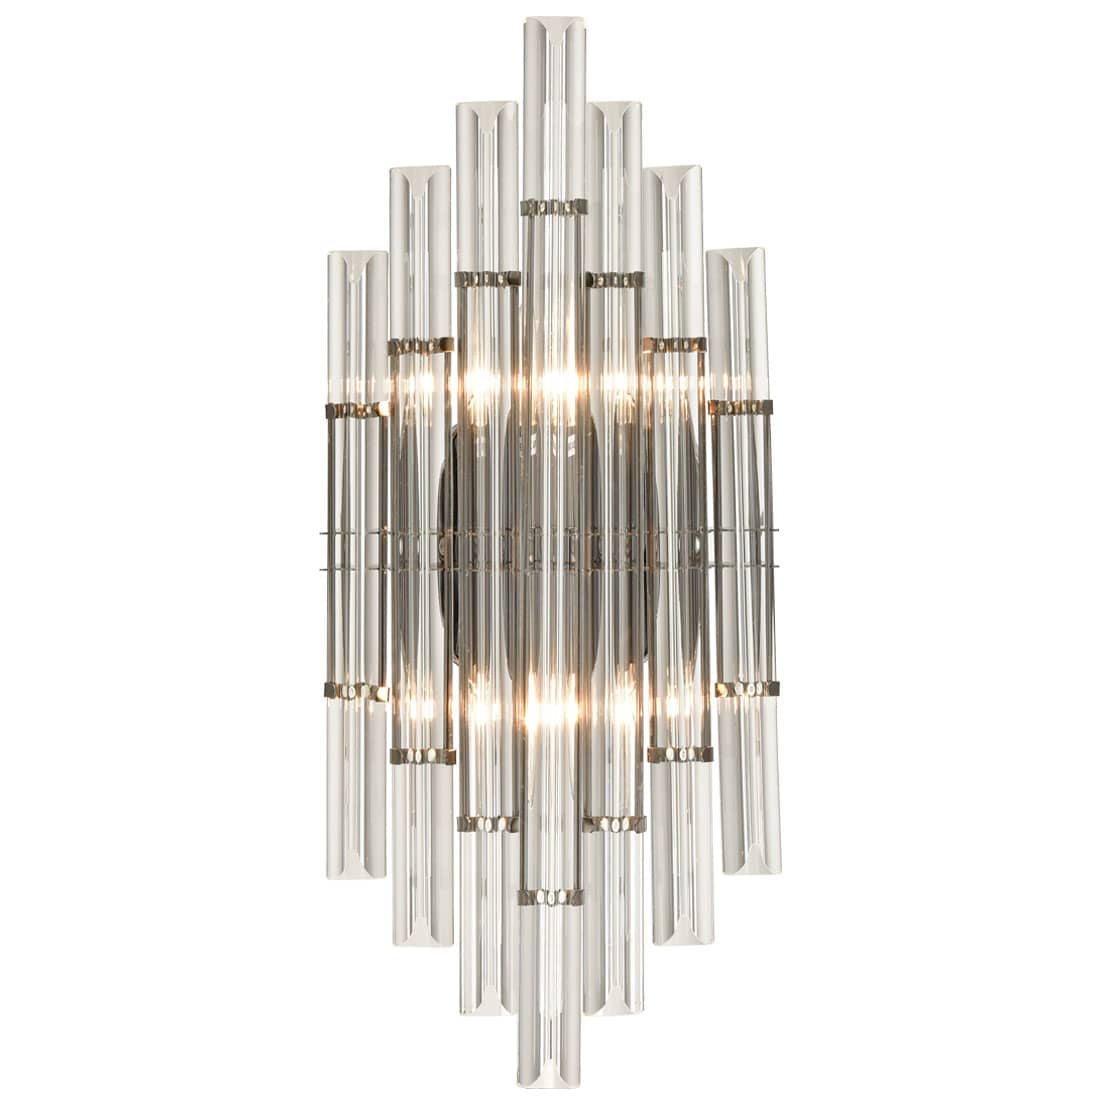 Crystal Wall Sconce Lighting for Bathroom in Black Finish